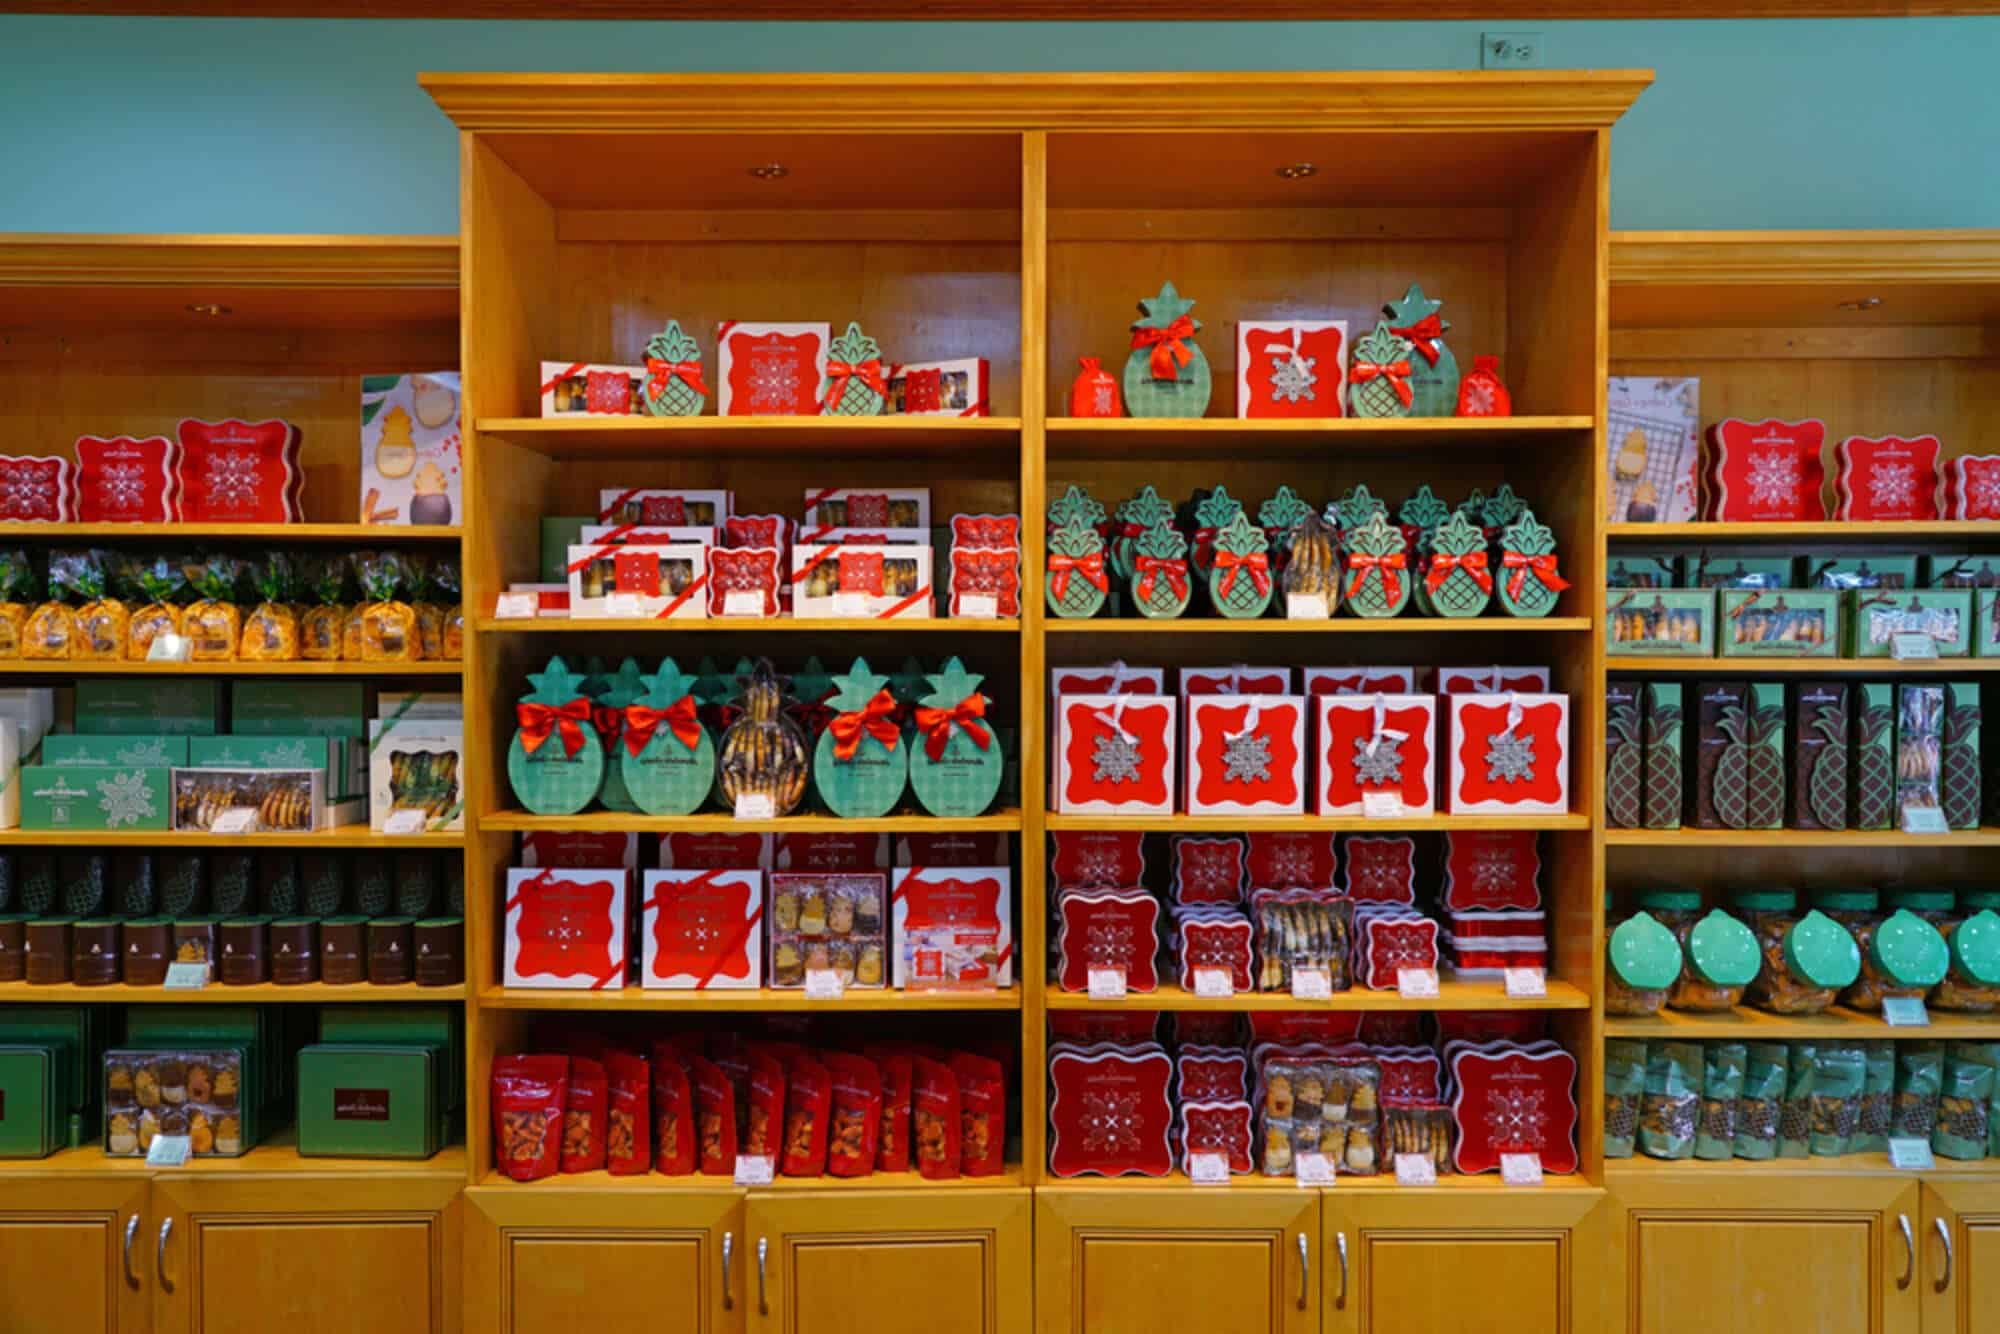 Image of Honolulu Cookie Company products on shelves.